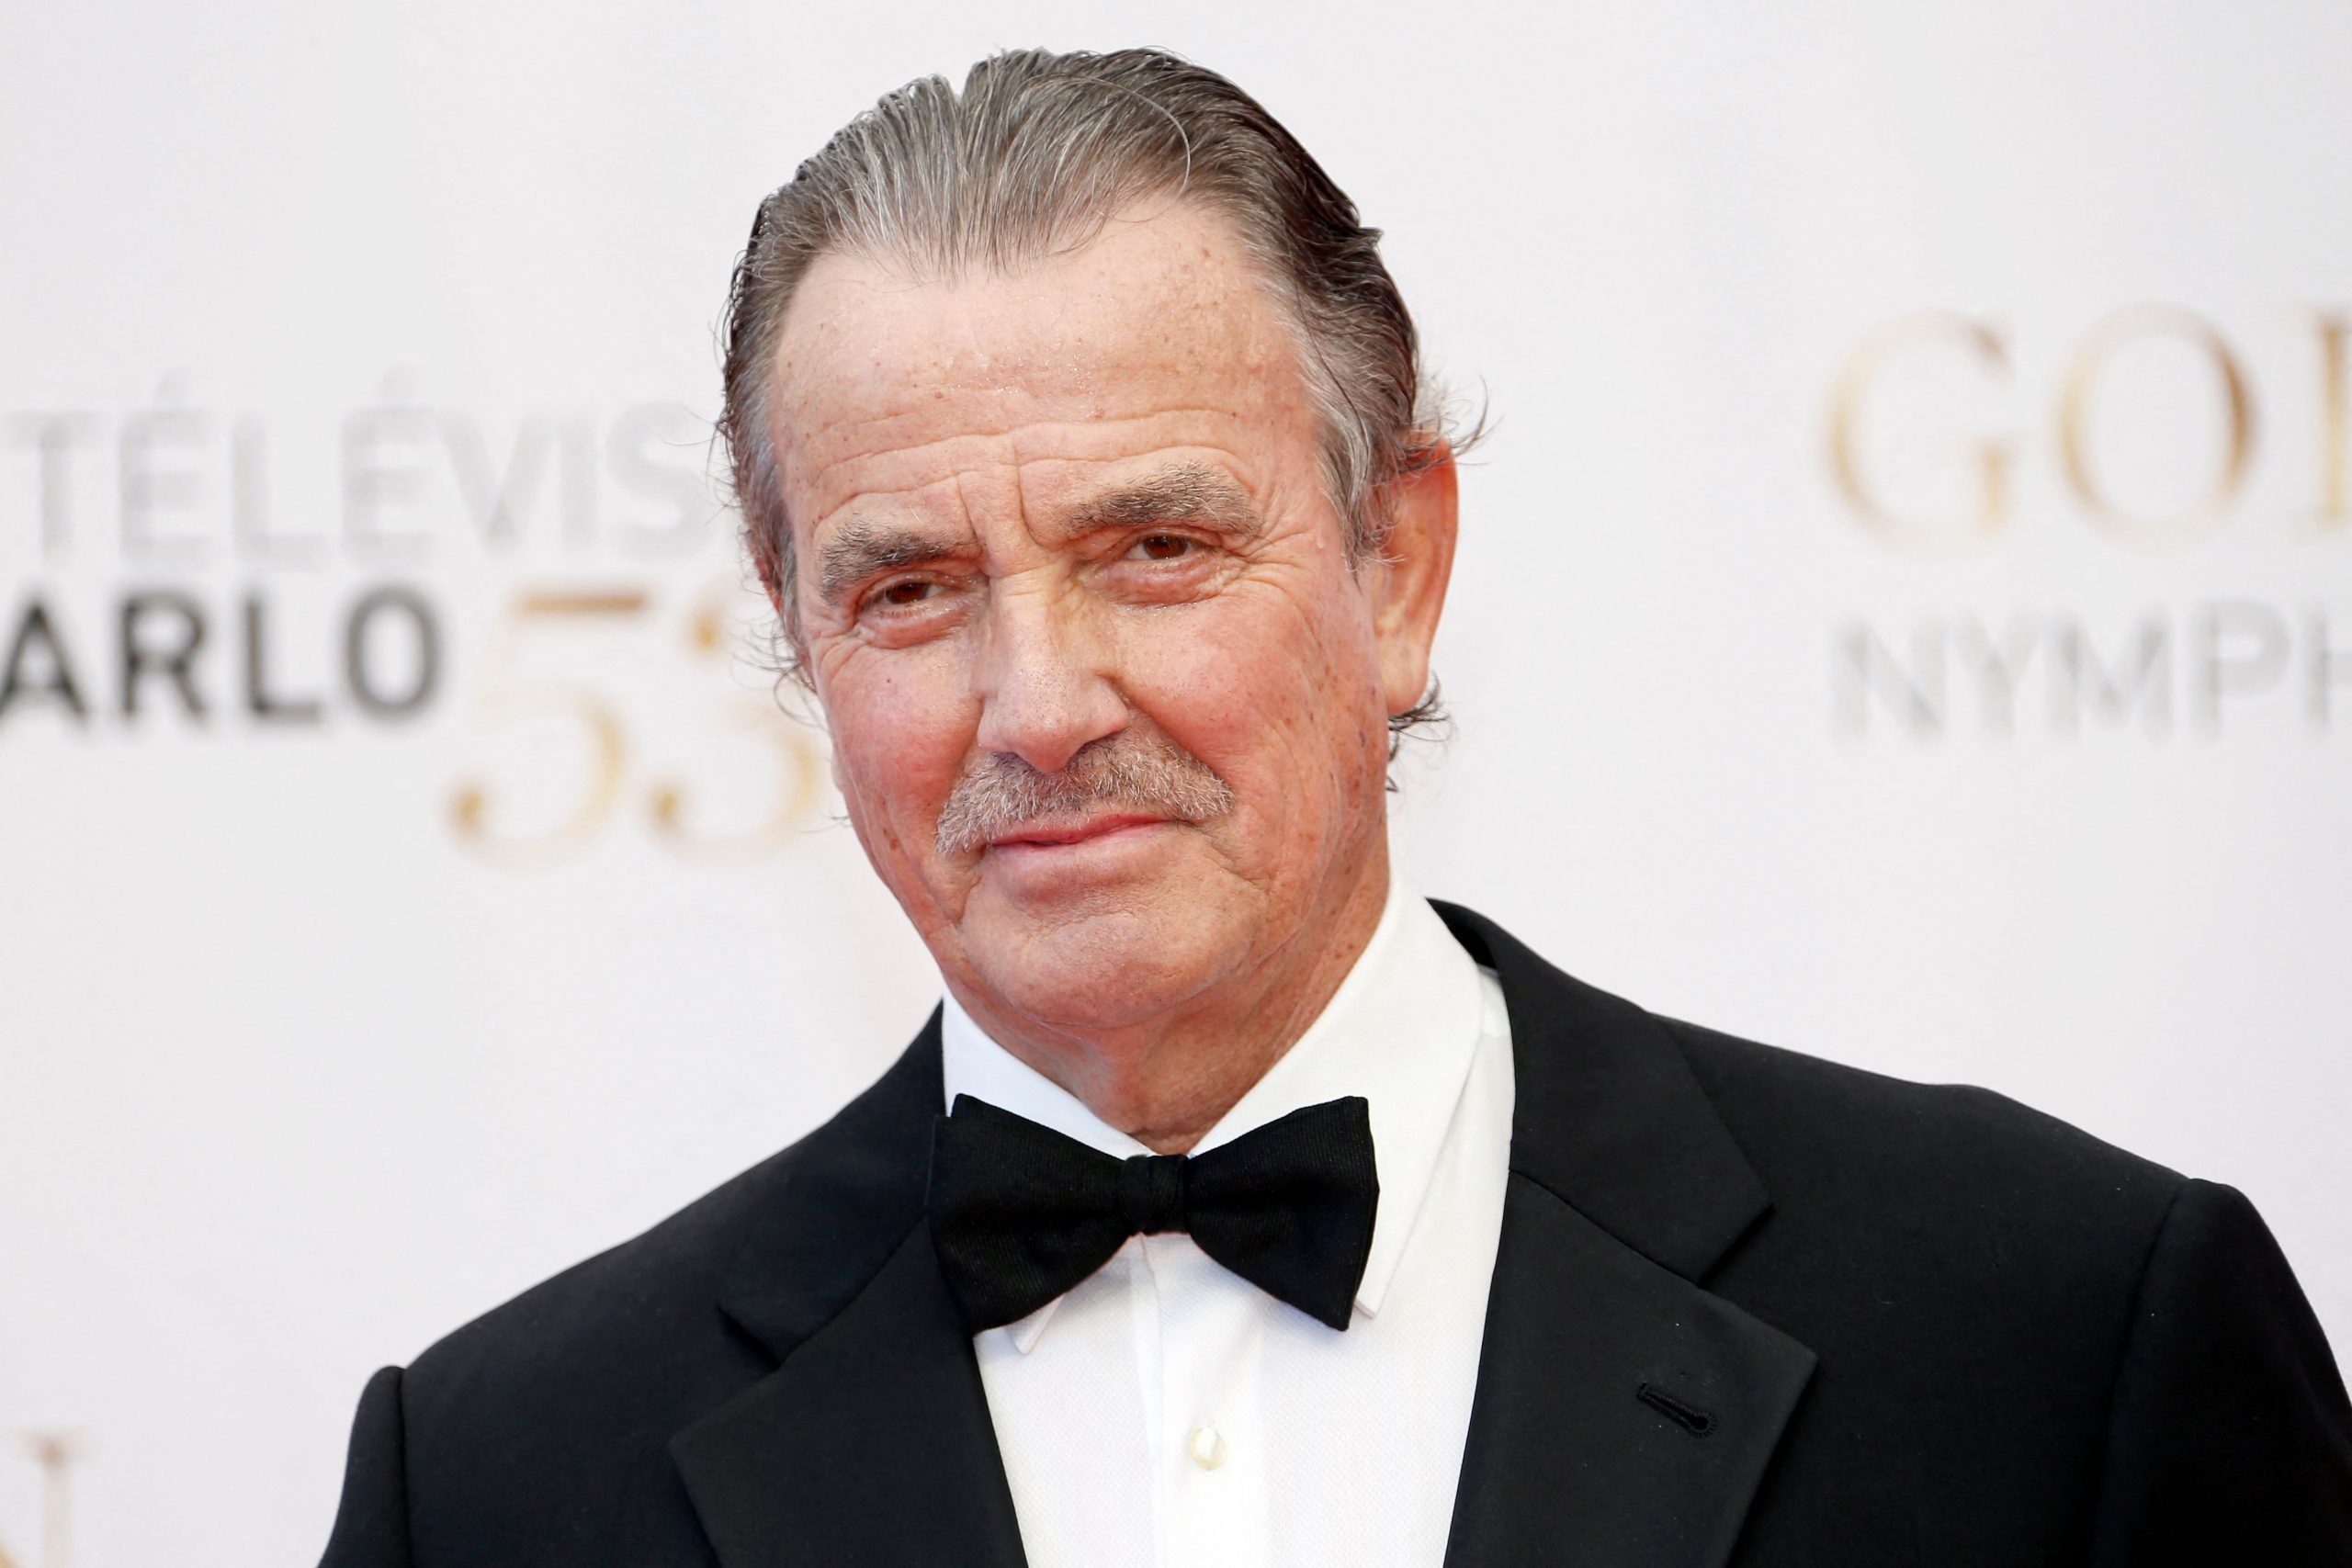 'The Young and the Restless' star Eric Braeden has portrayed Victor Newman for over four decades.